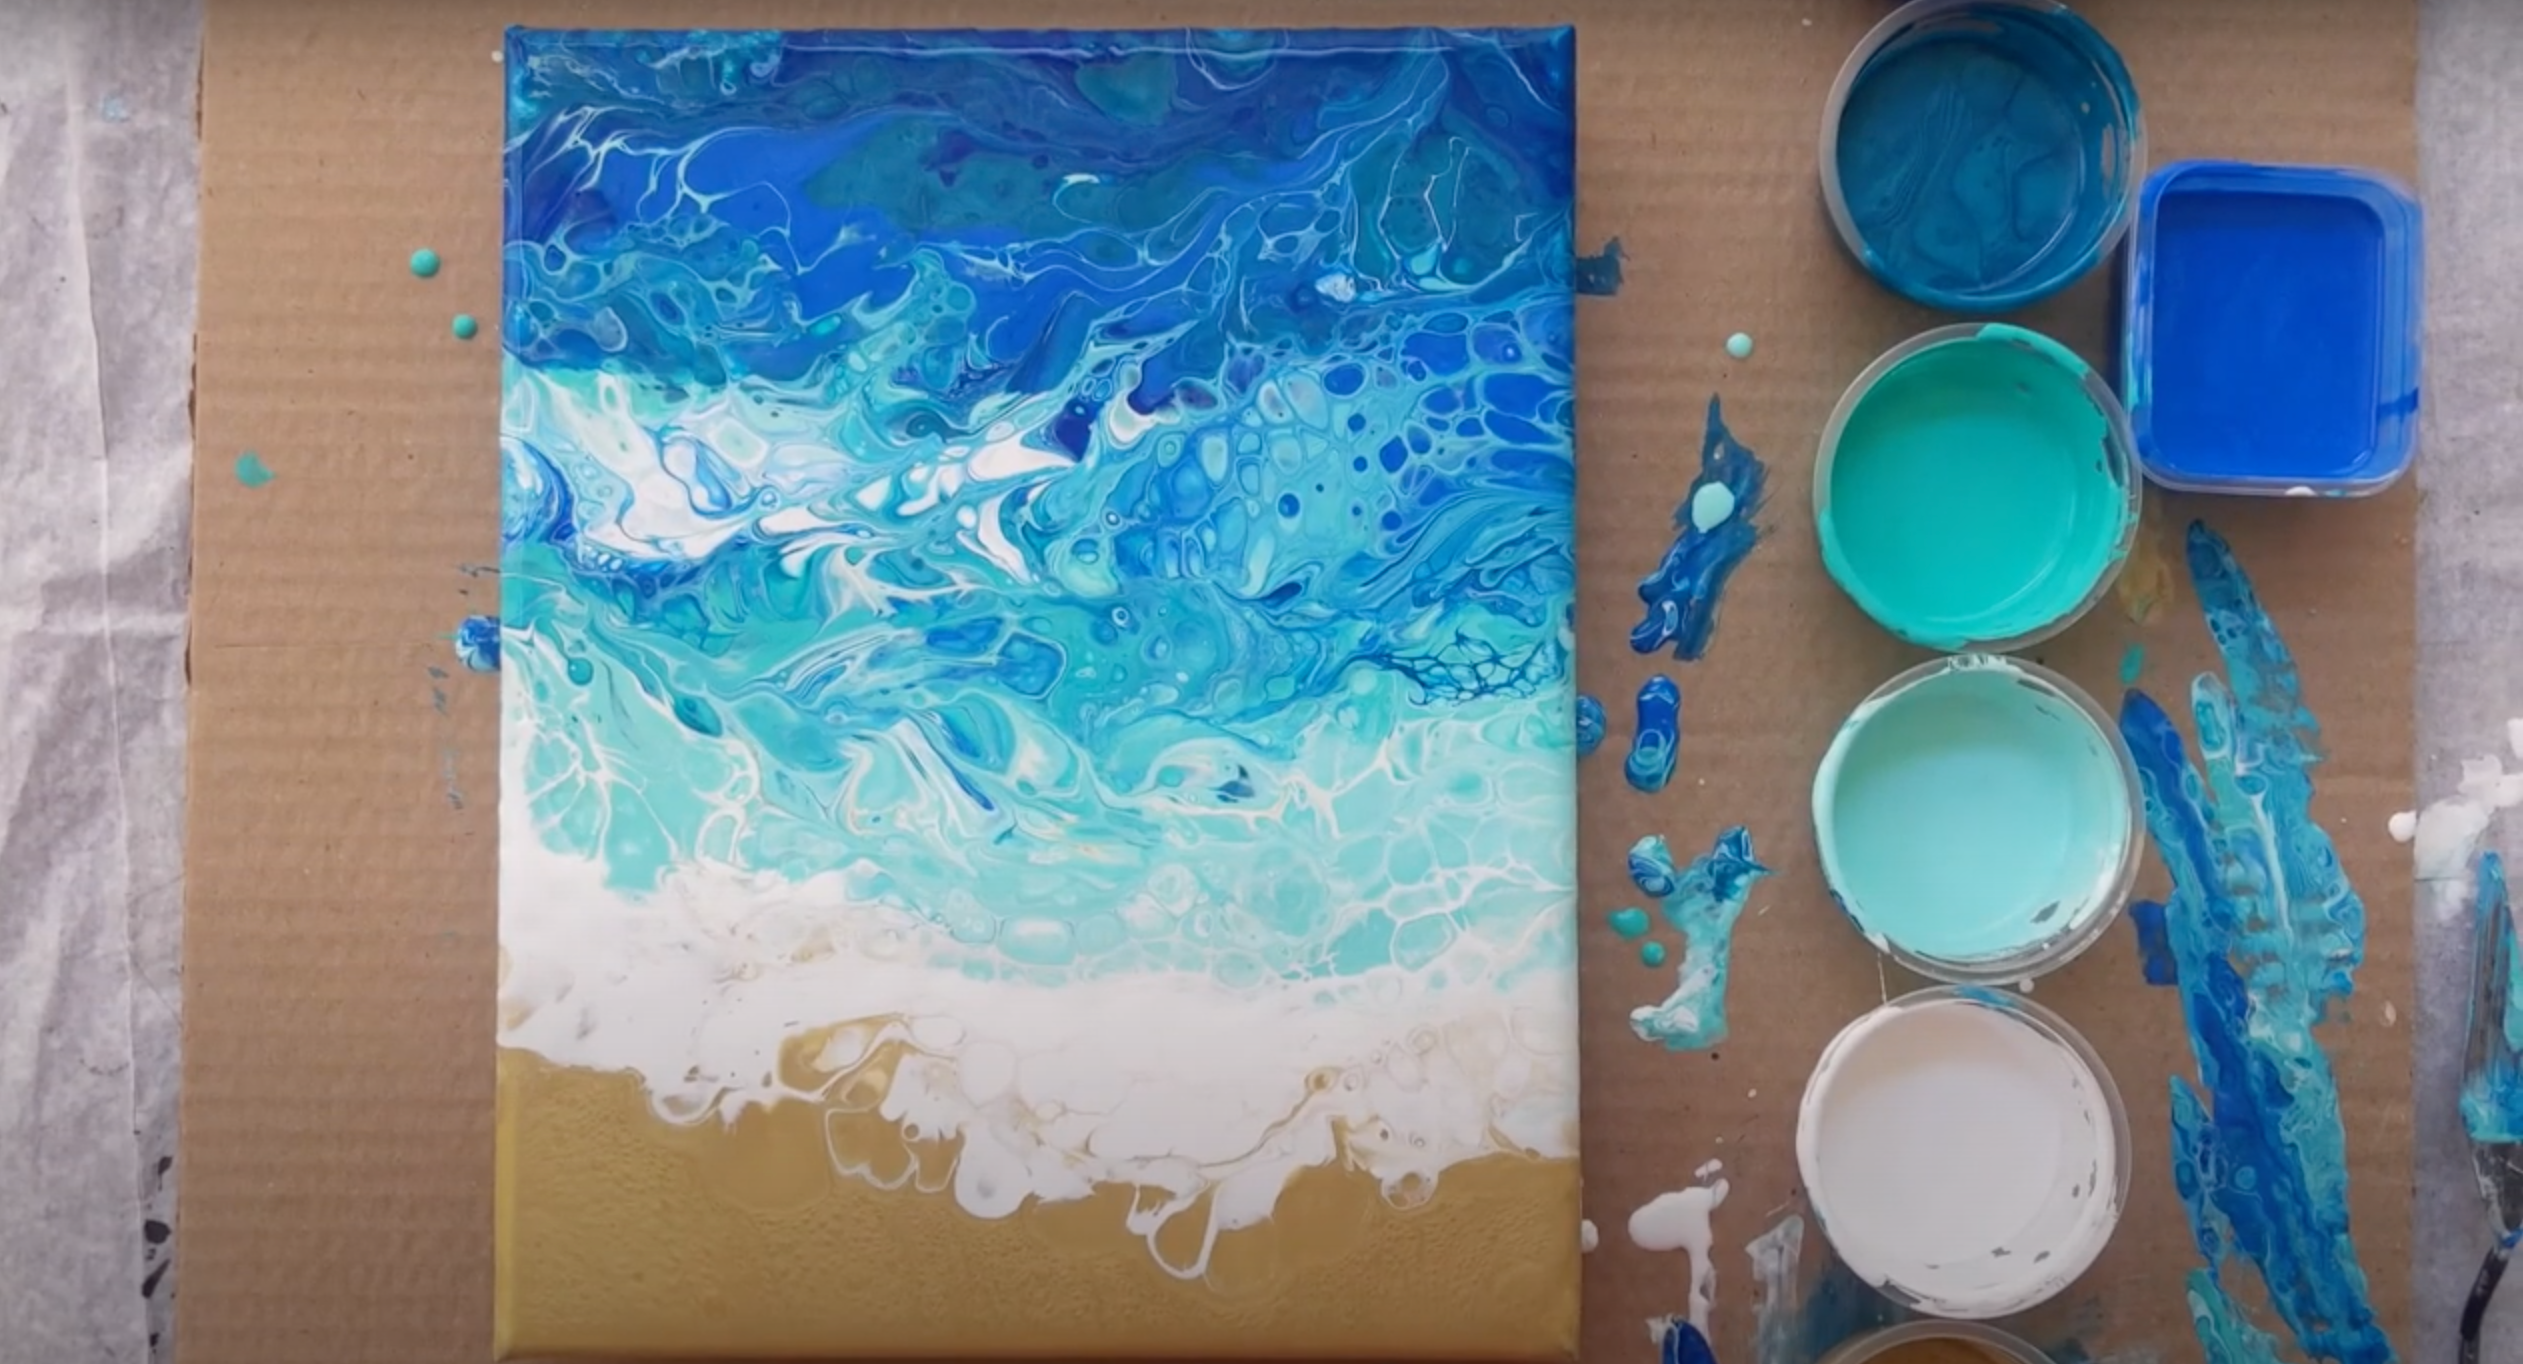 Acrylic Pour Painting Idea #3: Blue Ocean by Milly Art